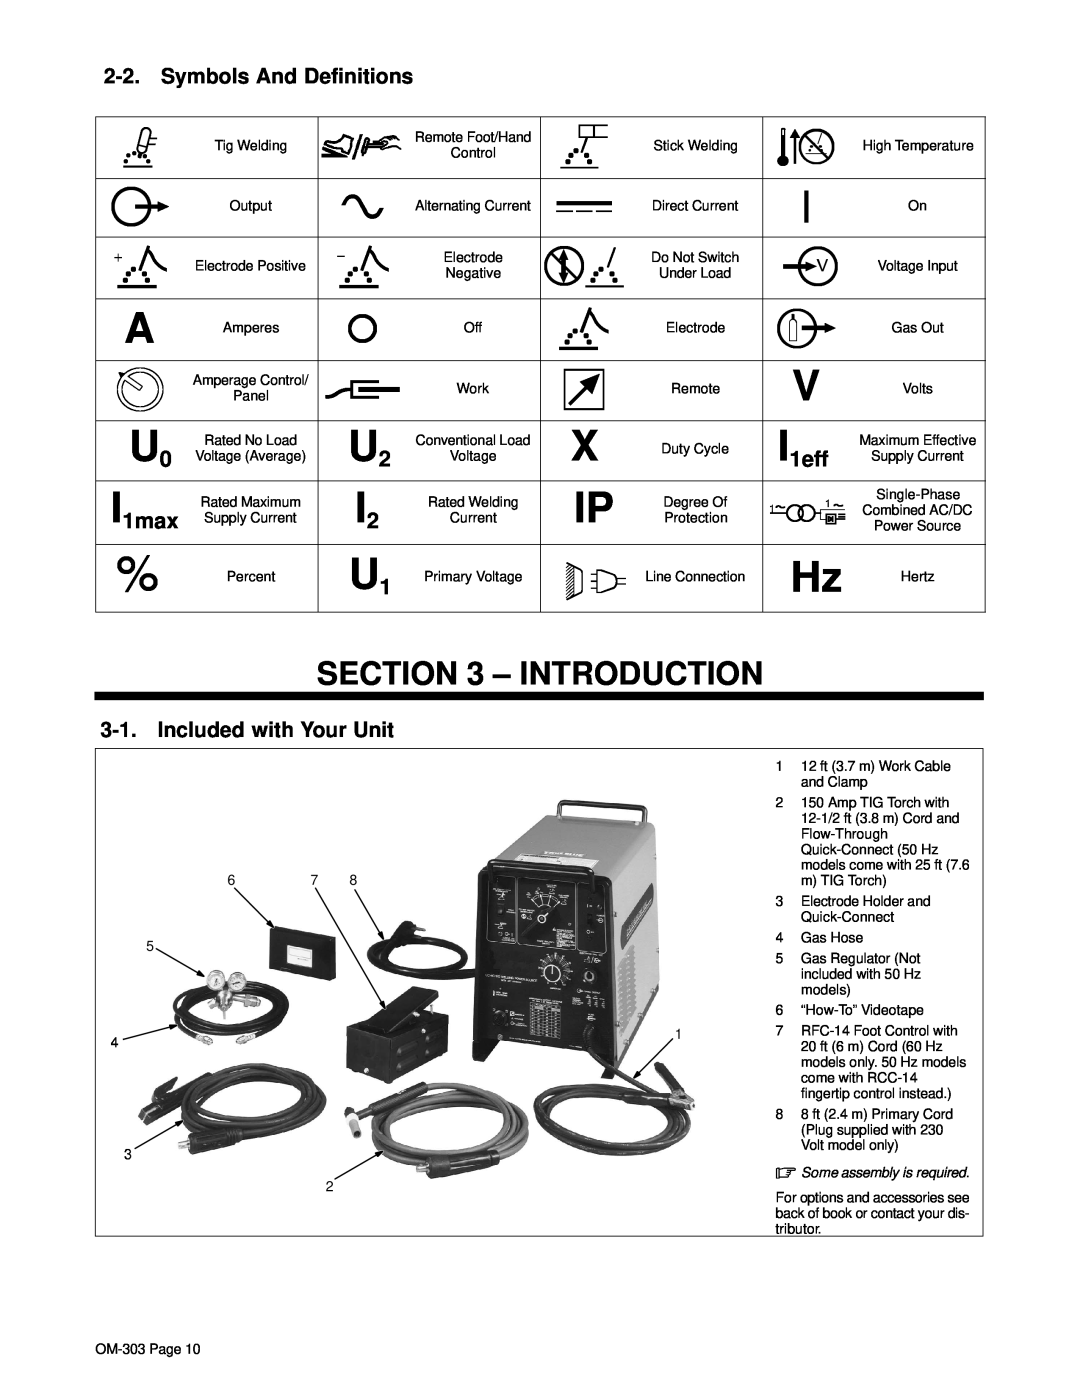 Hobart OM-303 manual Introduction, Symbols And Definitions, Included with Your Unit, I1eff, I1max 